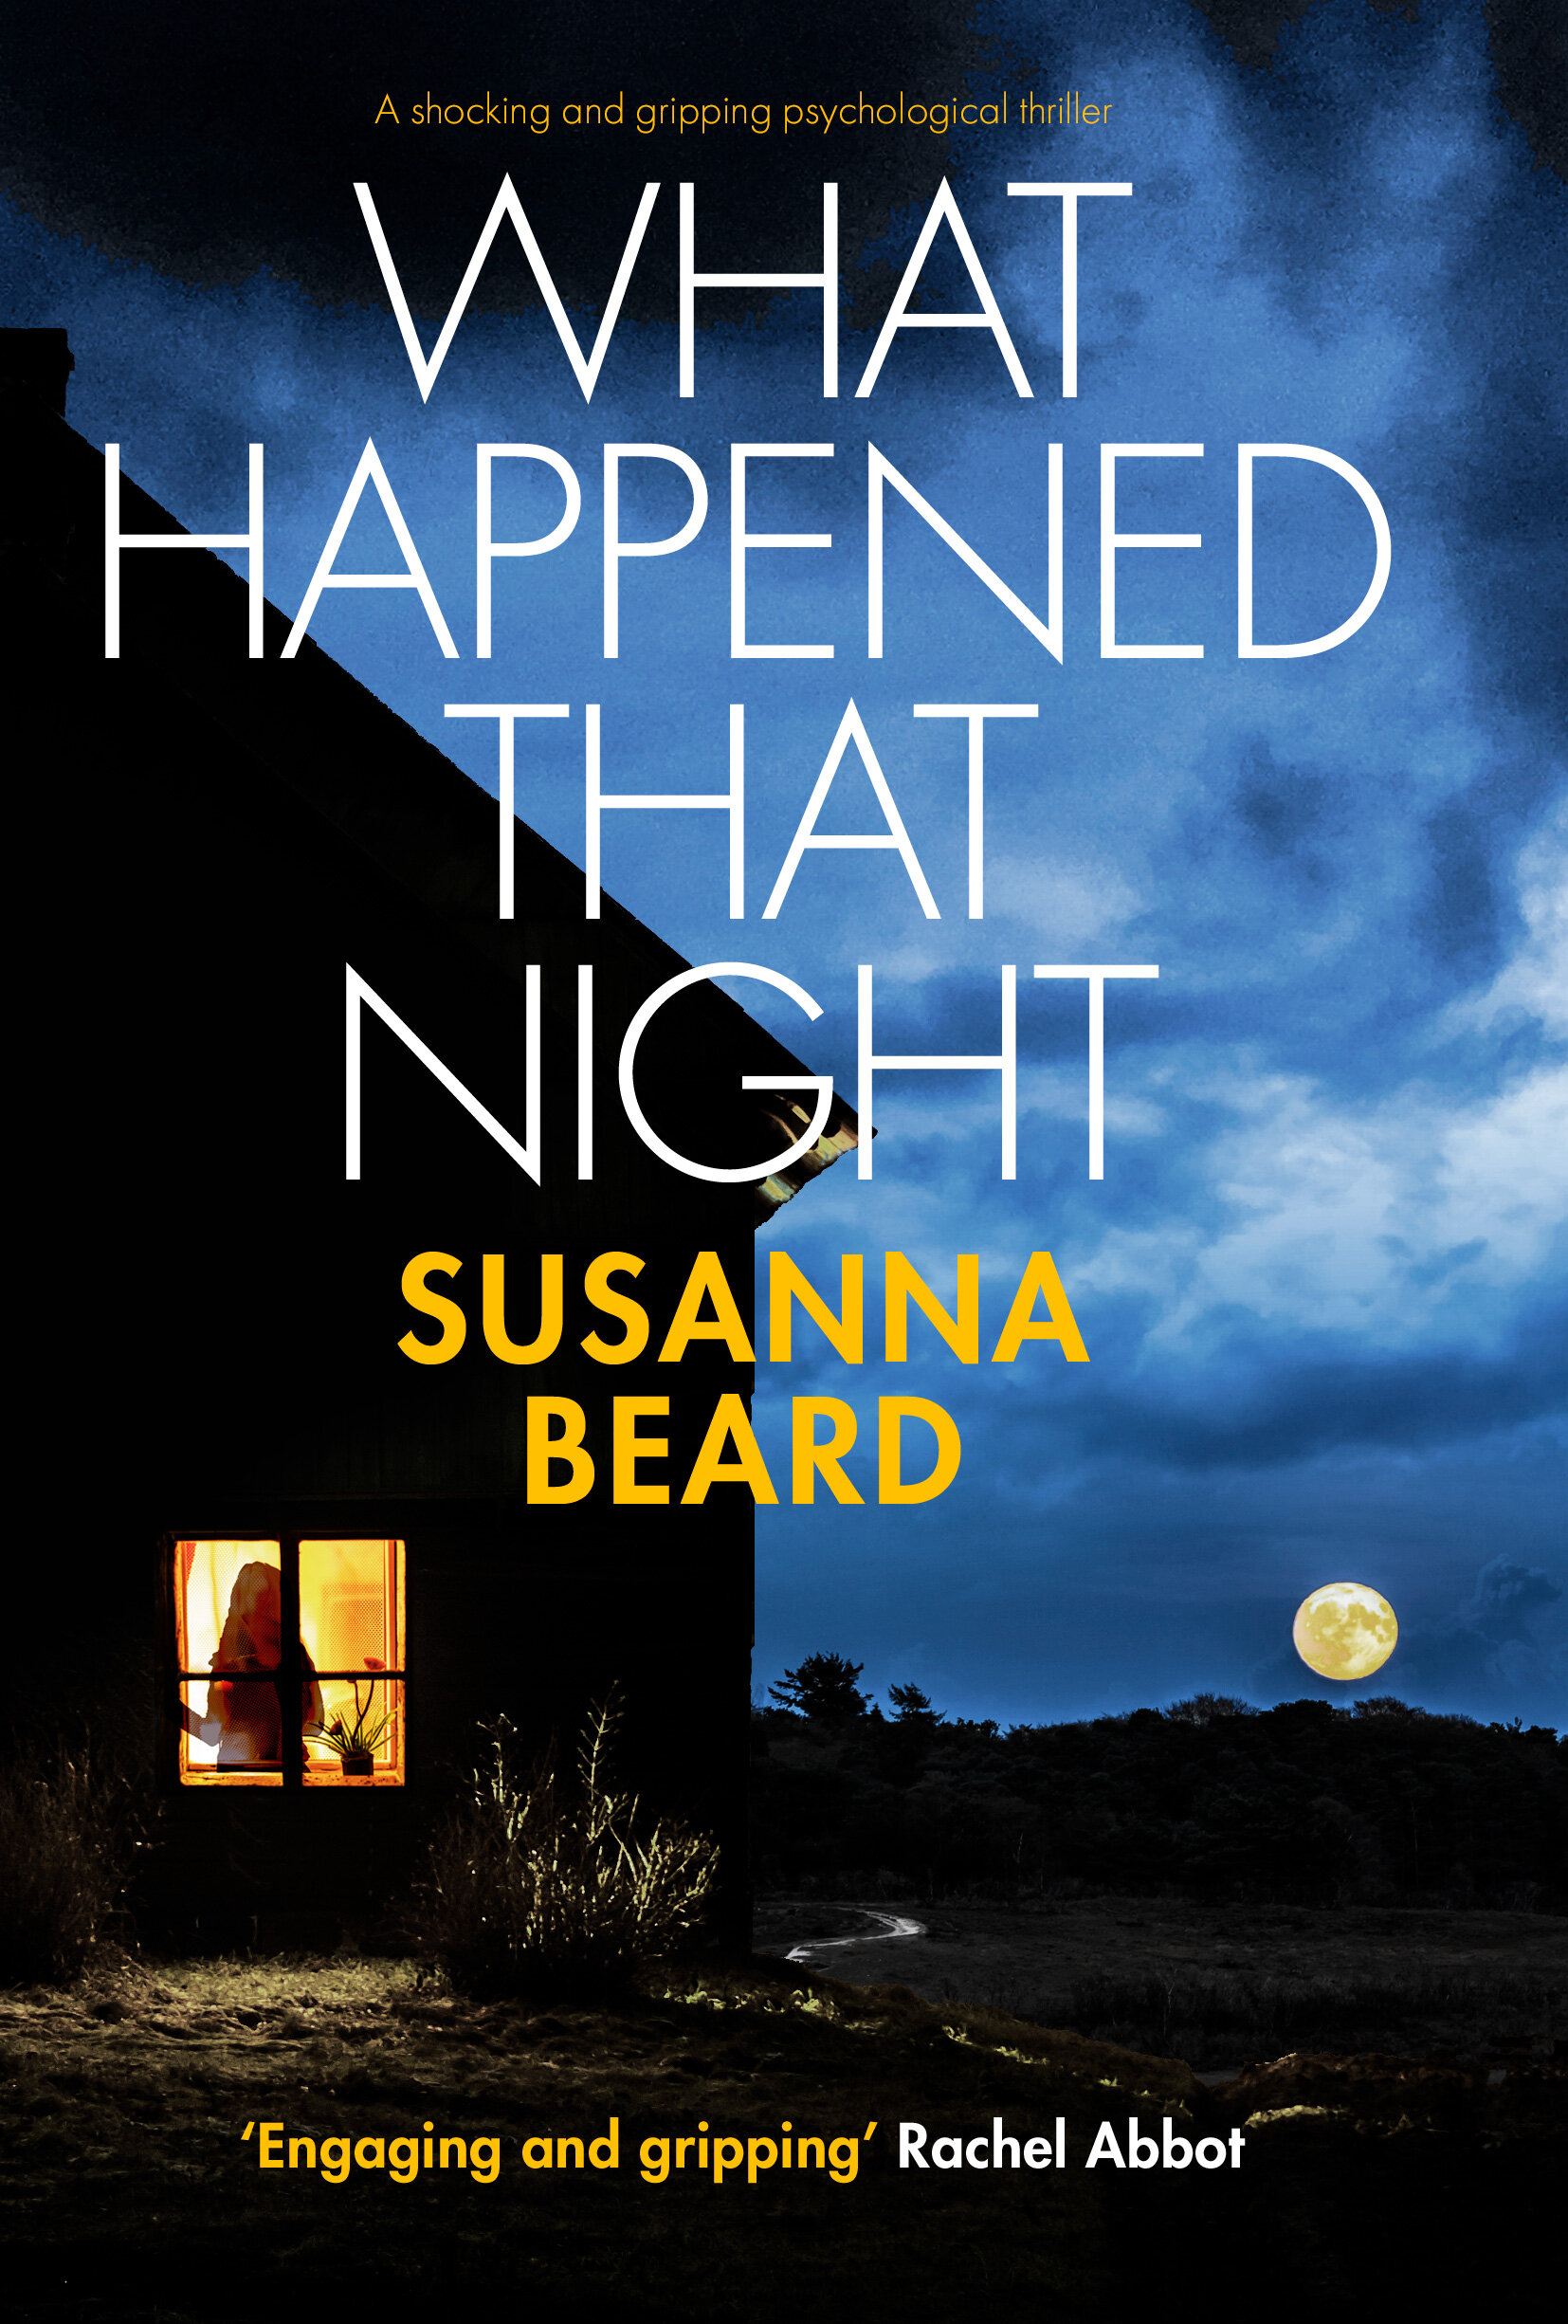 WHAT HAPPENED THAT NIGHT Publish Cover with Tagline.jpg